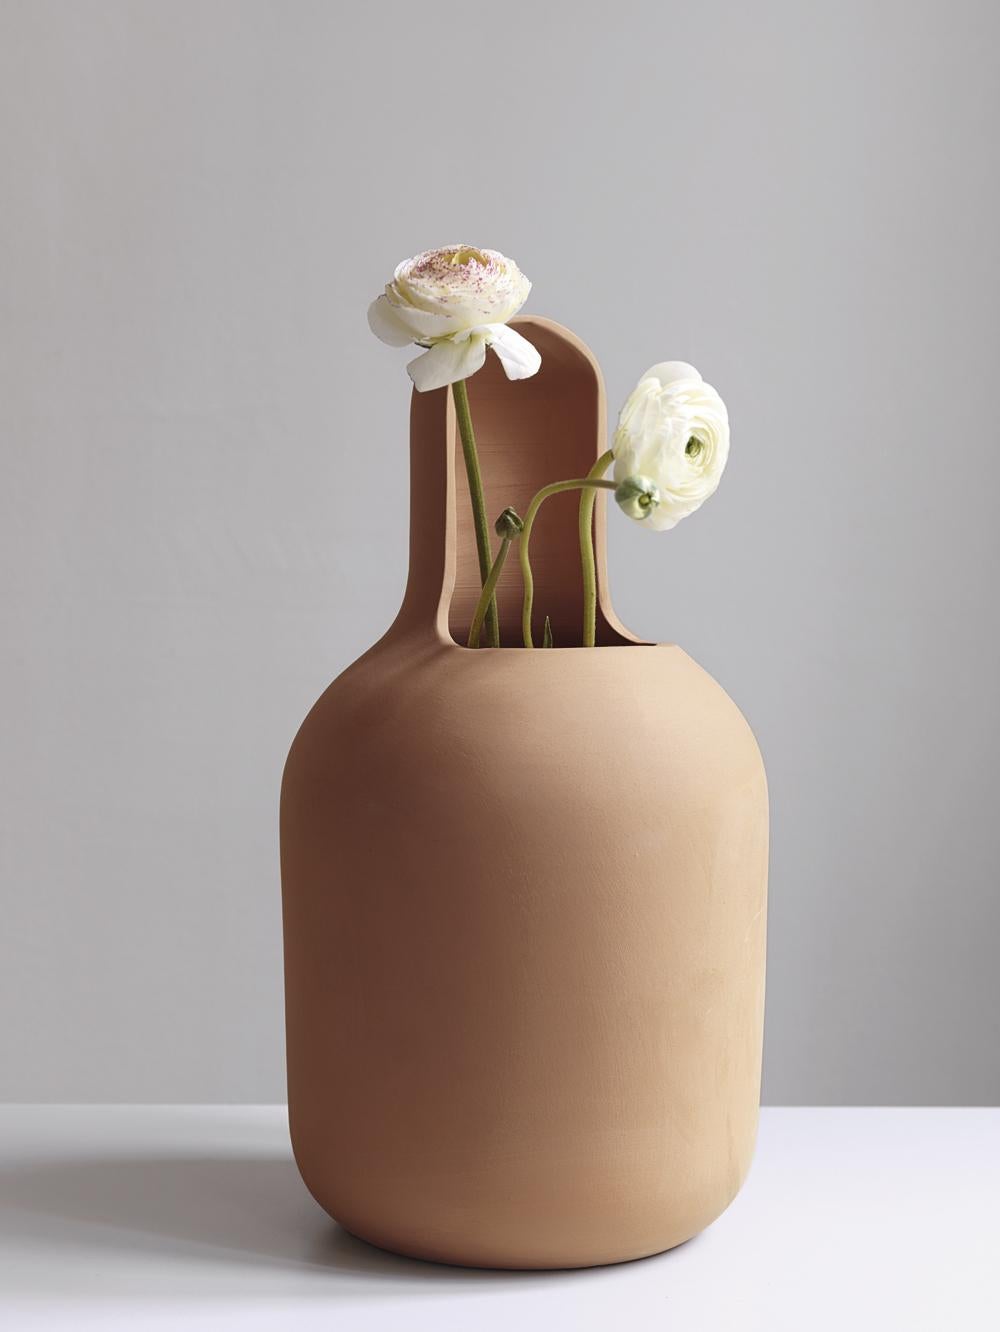 Contemporary Set of 3 Outdoor Terracotta Vases from the series 